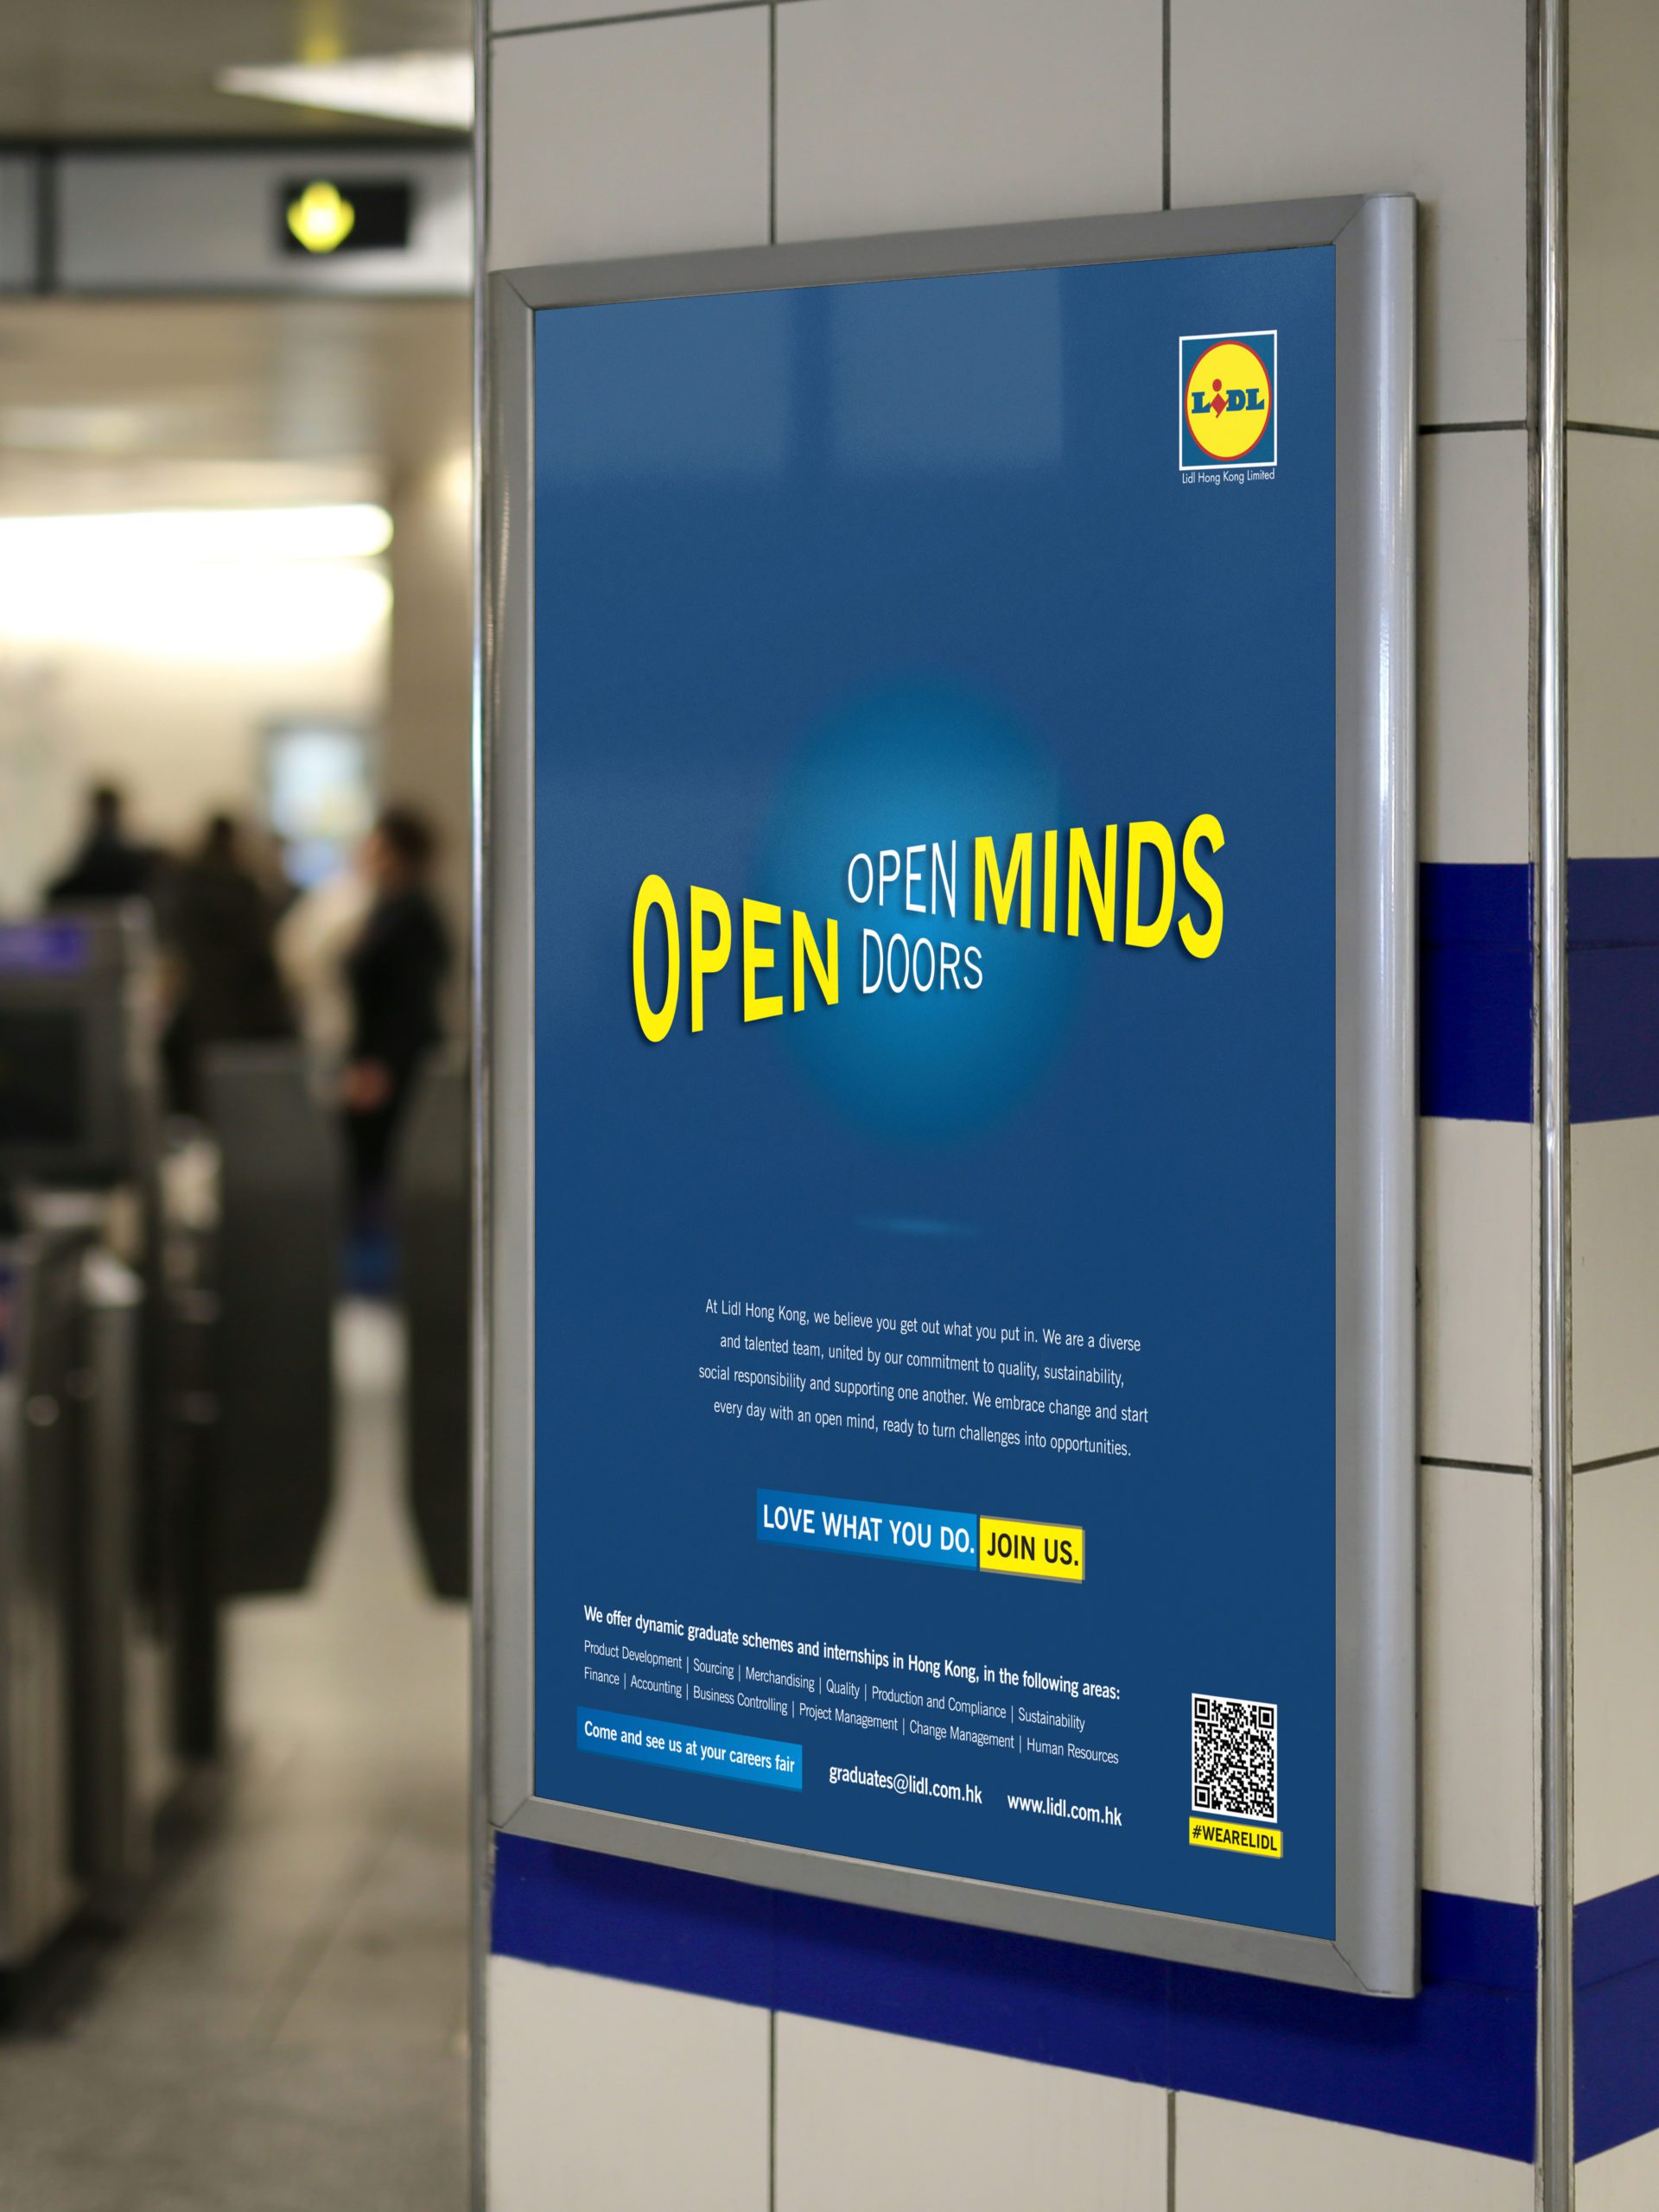 Lidl Hong Kong Marketing Campaign portrait advertisement in metro station